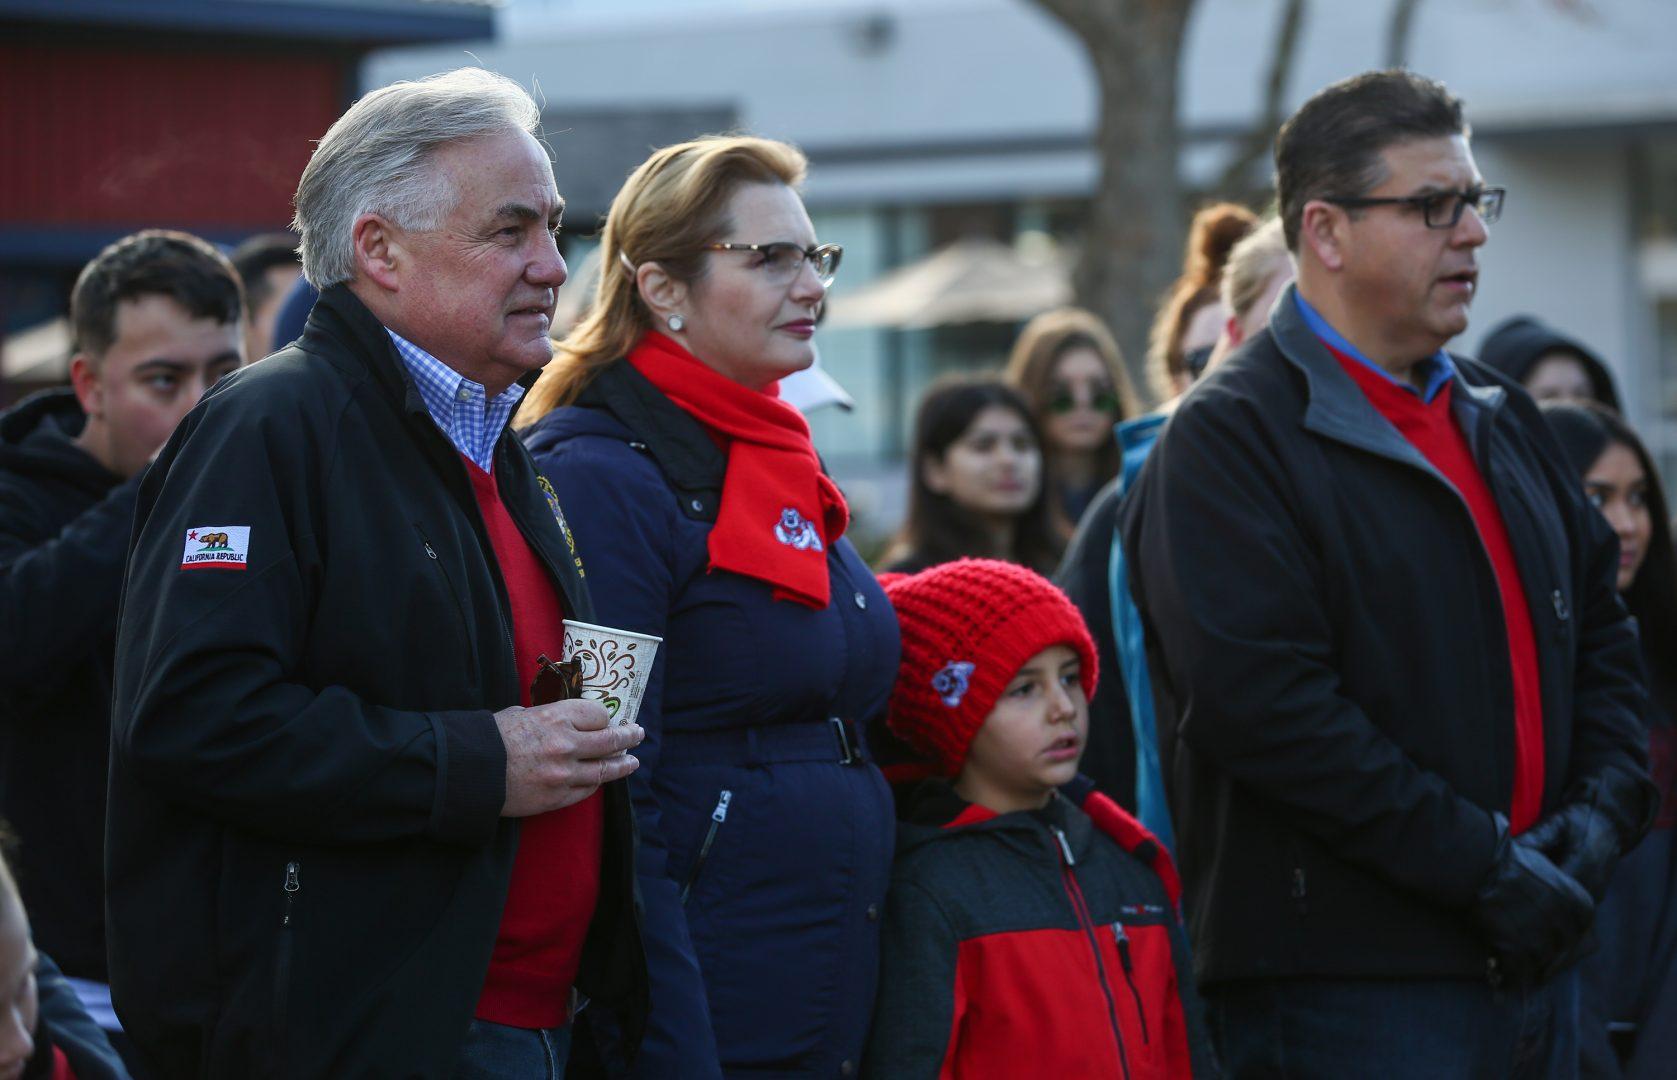 Assemblyman Jim Patterson stands with President Joseph Castro and family during the drug awareness walk hosted by Associated Students Inc. (ASI) on Saturday, Jan. 20, 2018 in front of the Henry Madden Library. ASI coordinated the drug awareness walk in response to the death of Omar Nemeth, a Fresno State student who died due an apparent drug overdose. (Alejandro Soto/The Collegian)